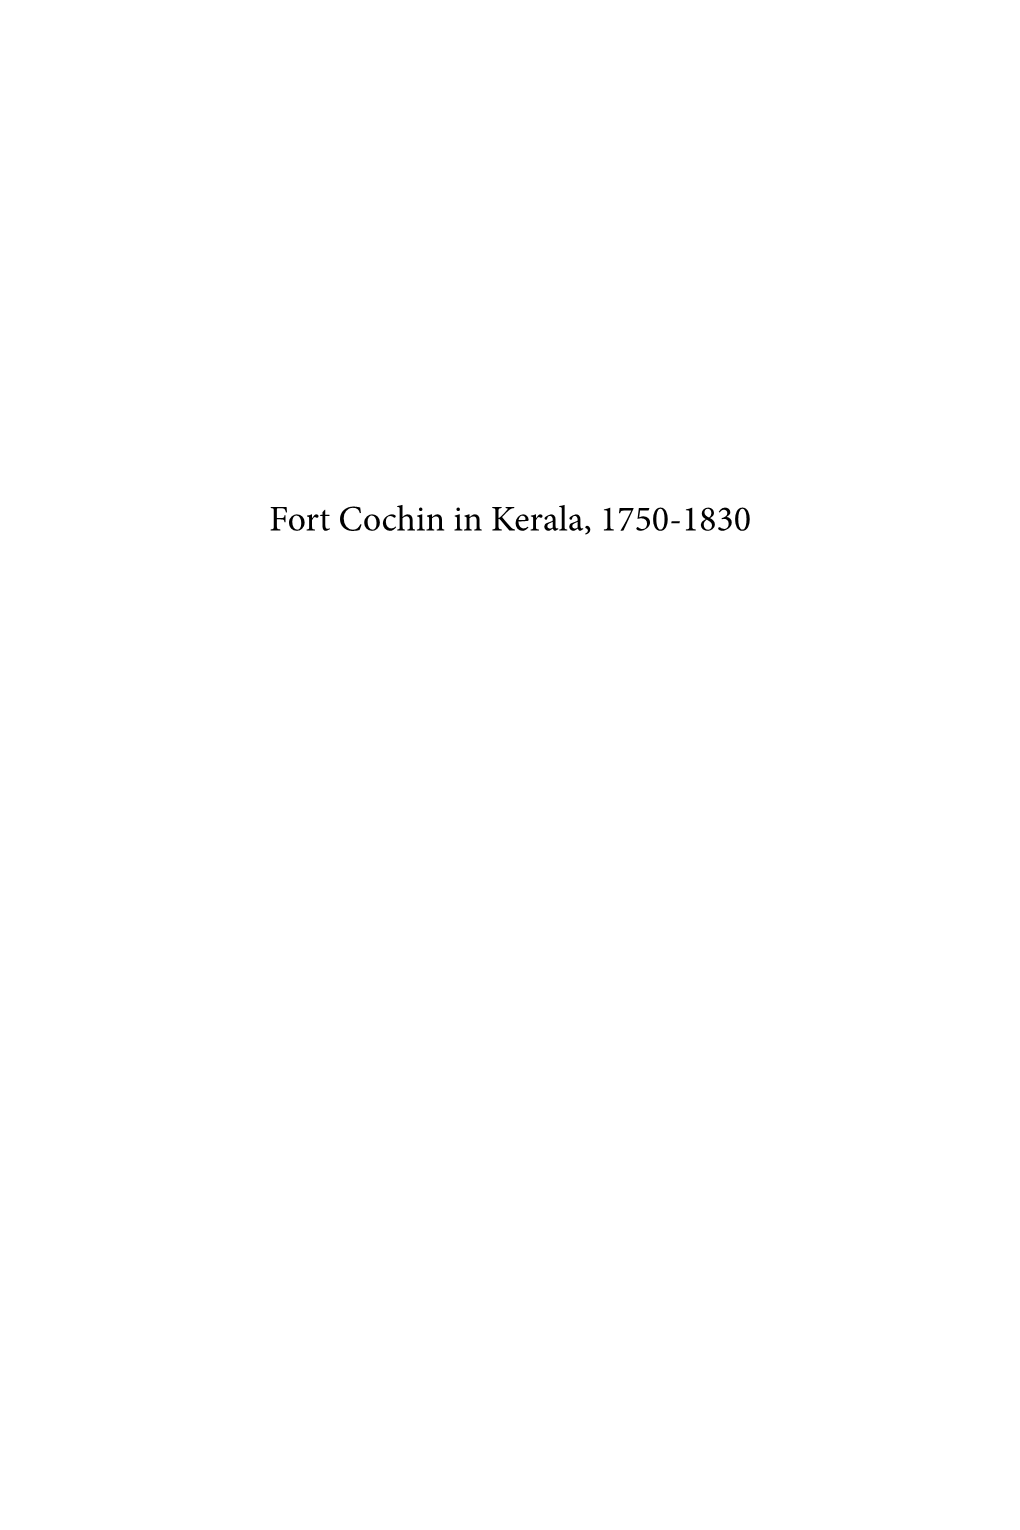 Fort Cochin in Kerala, 1750-1830 TANAP Monographs on the History of Asian-European Interaction